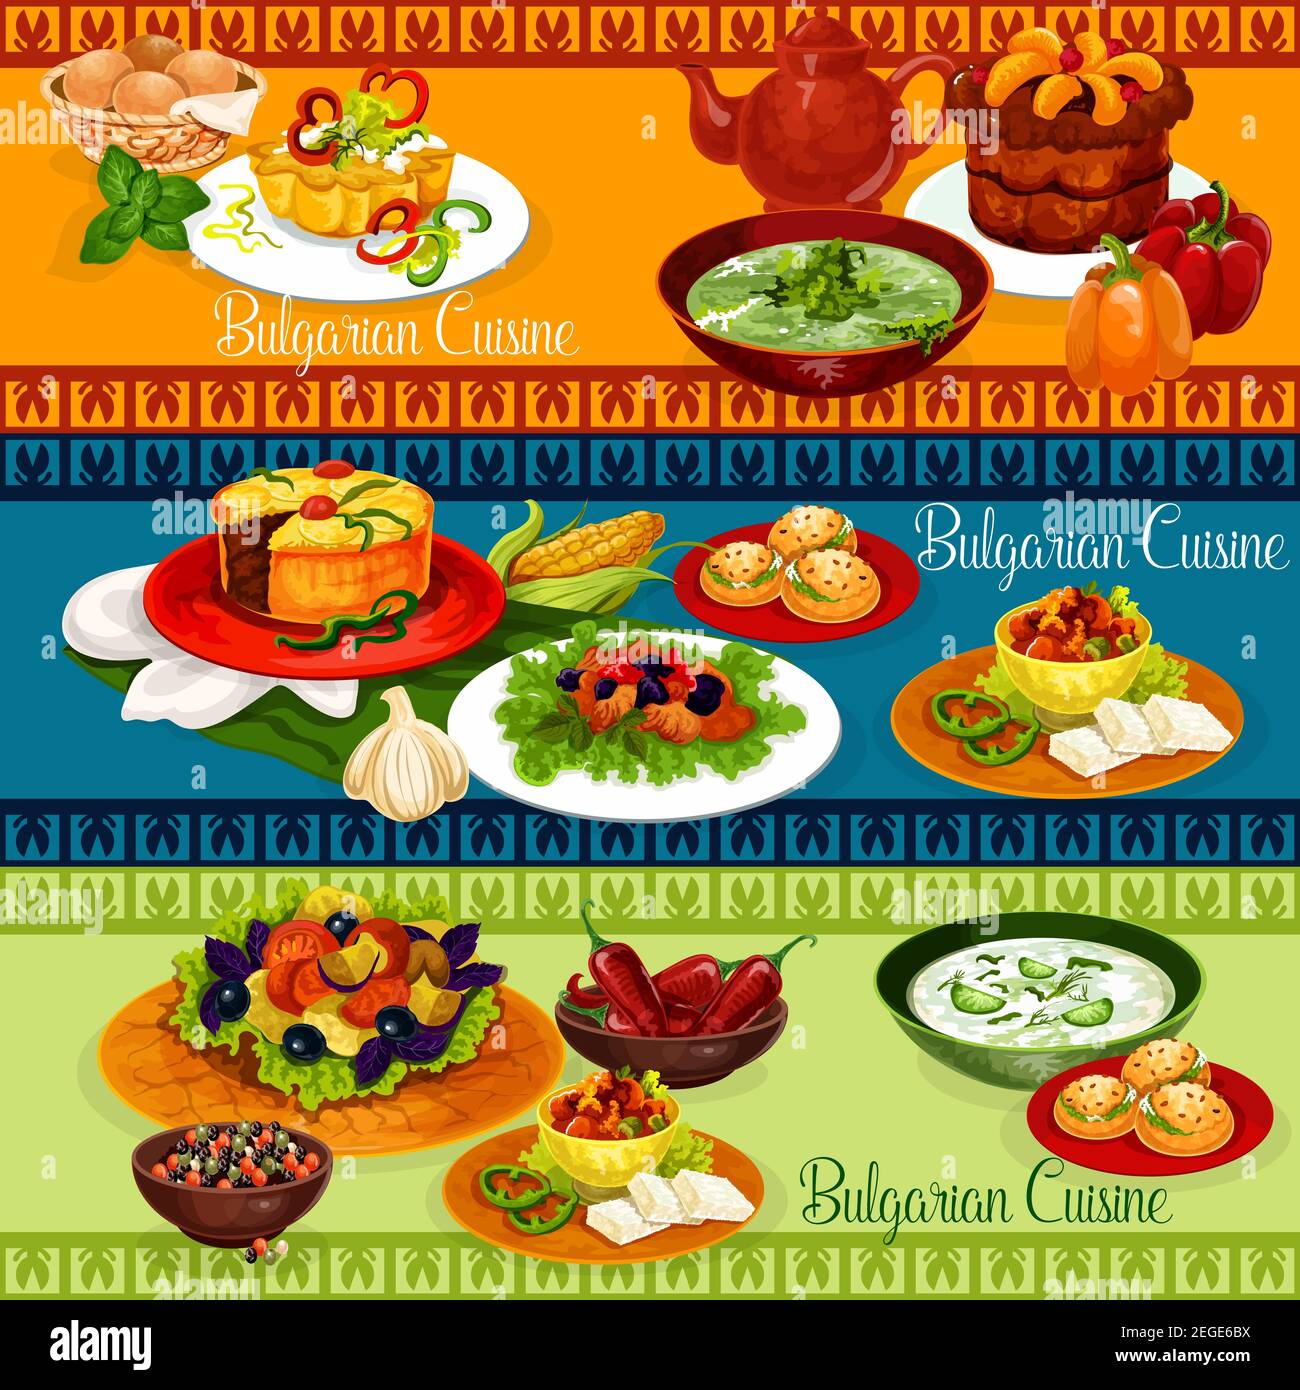 Bulgarian food banner for balkan cuisine restaurant menu design. Vegetable salad, stuffed pepper with cheese and cucumber yogurt soup, beef stew with Stock Vector